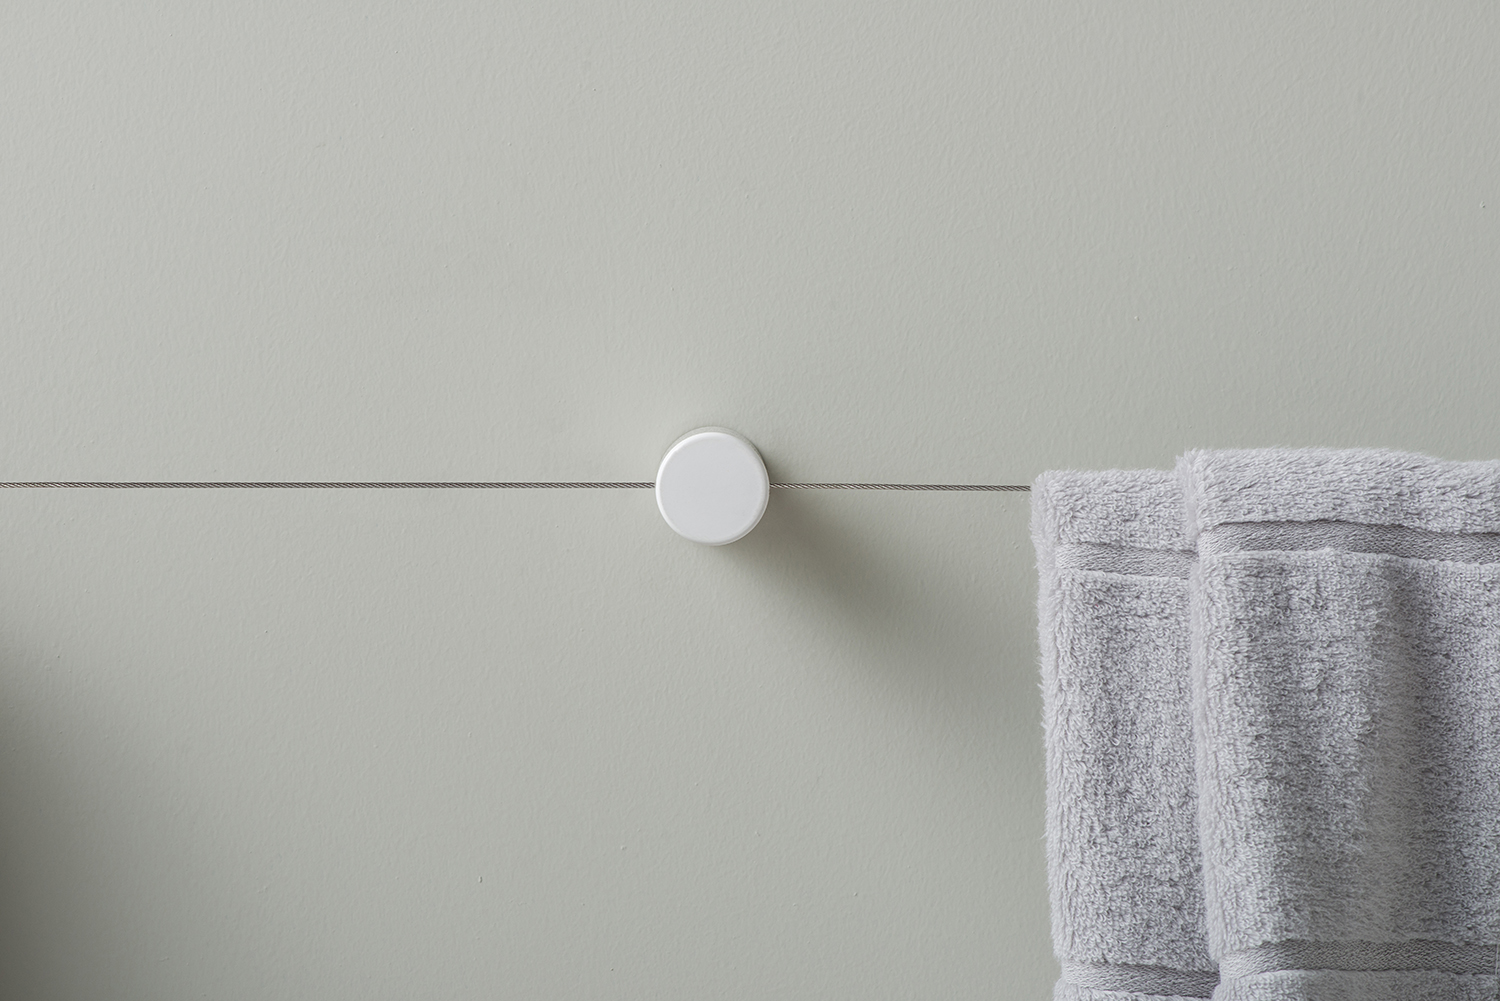 Dot: A Multifunctional Modular System for Bathroom Accessories